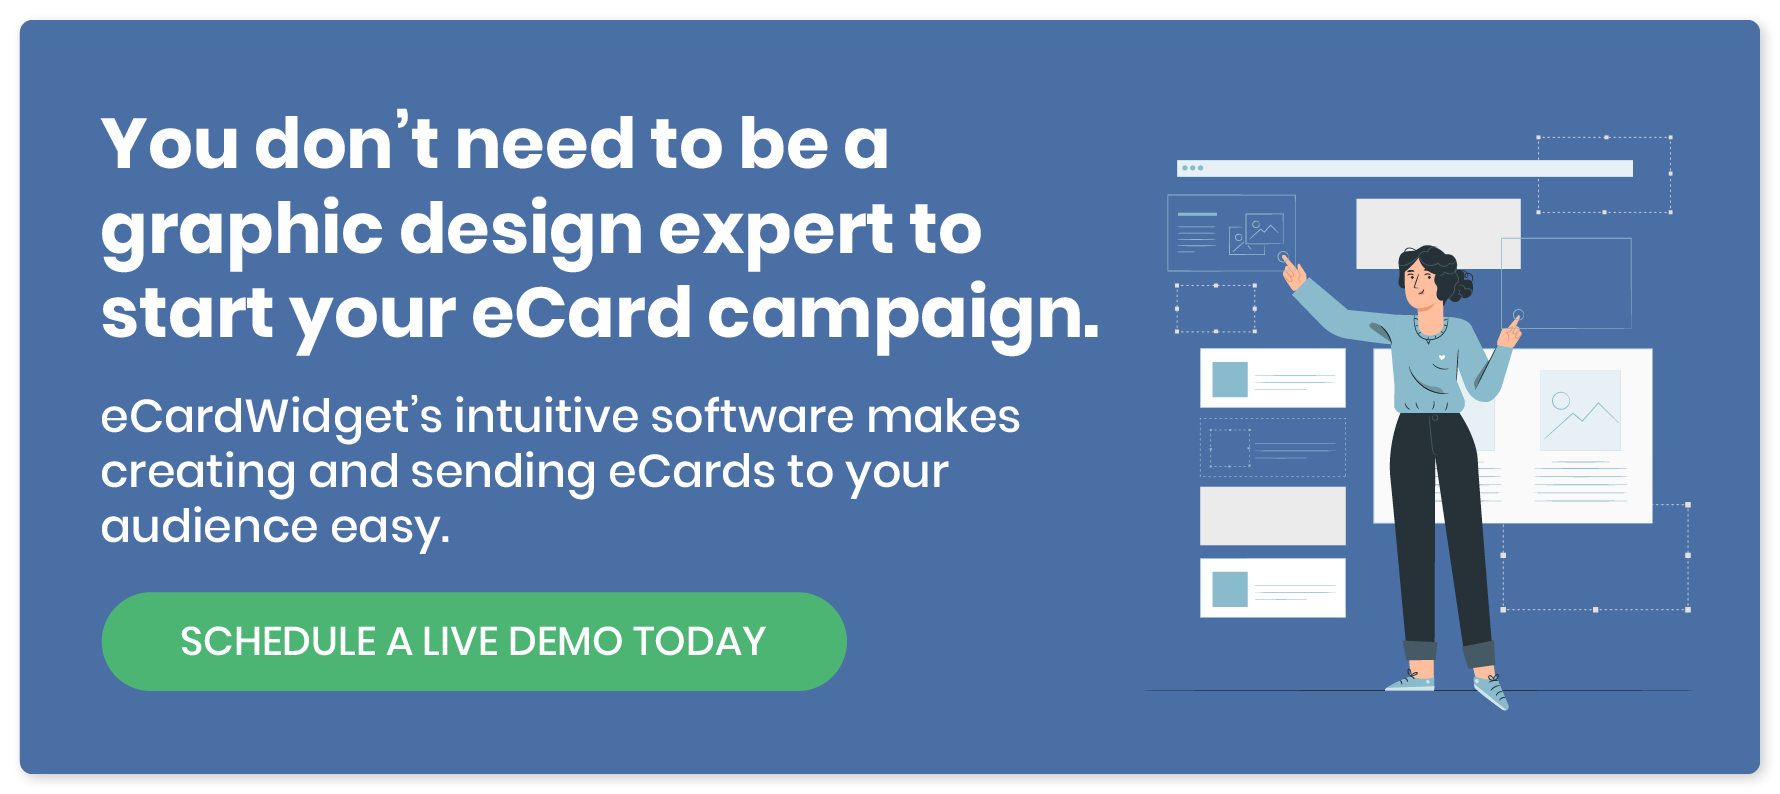 eCardWidget’s intuitive software makes creating and sending nonprofit eCards to your audience easy. Schedule a live demo today.